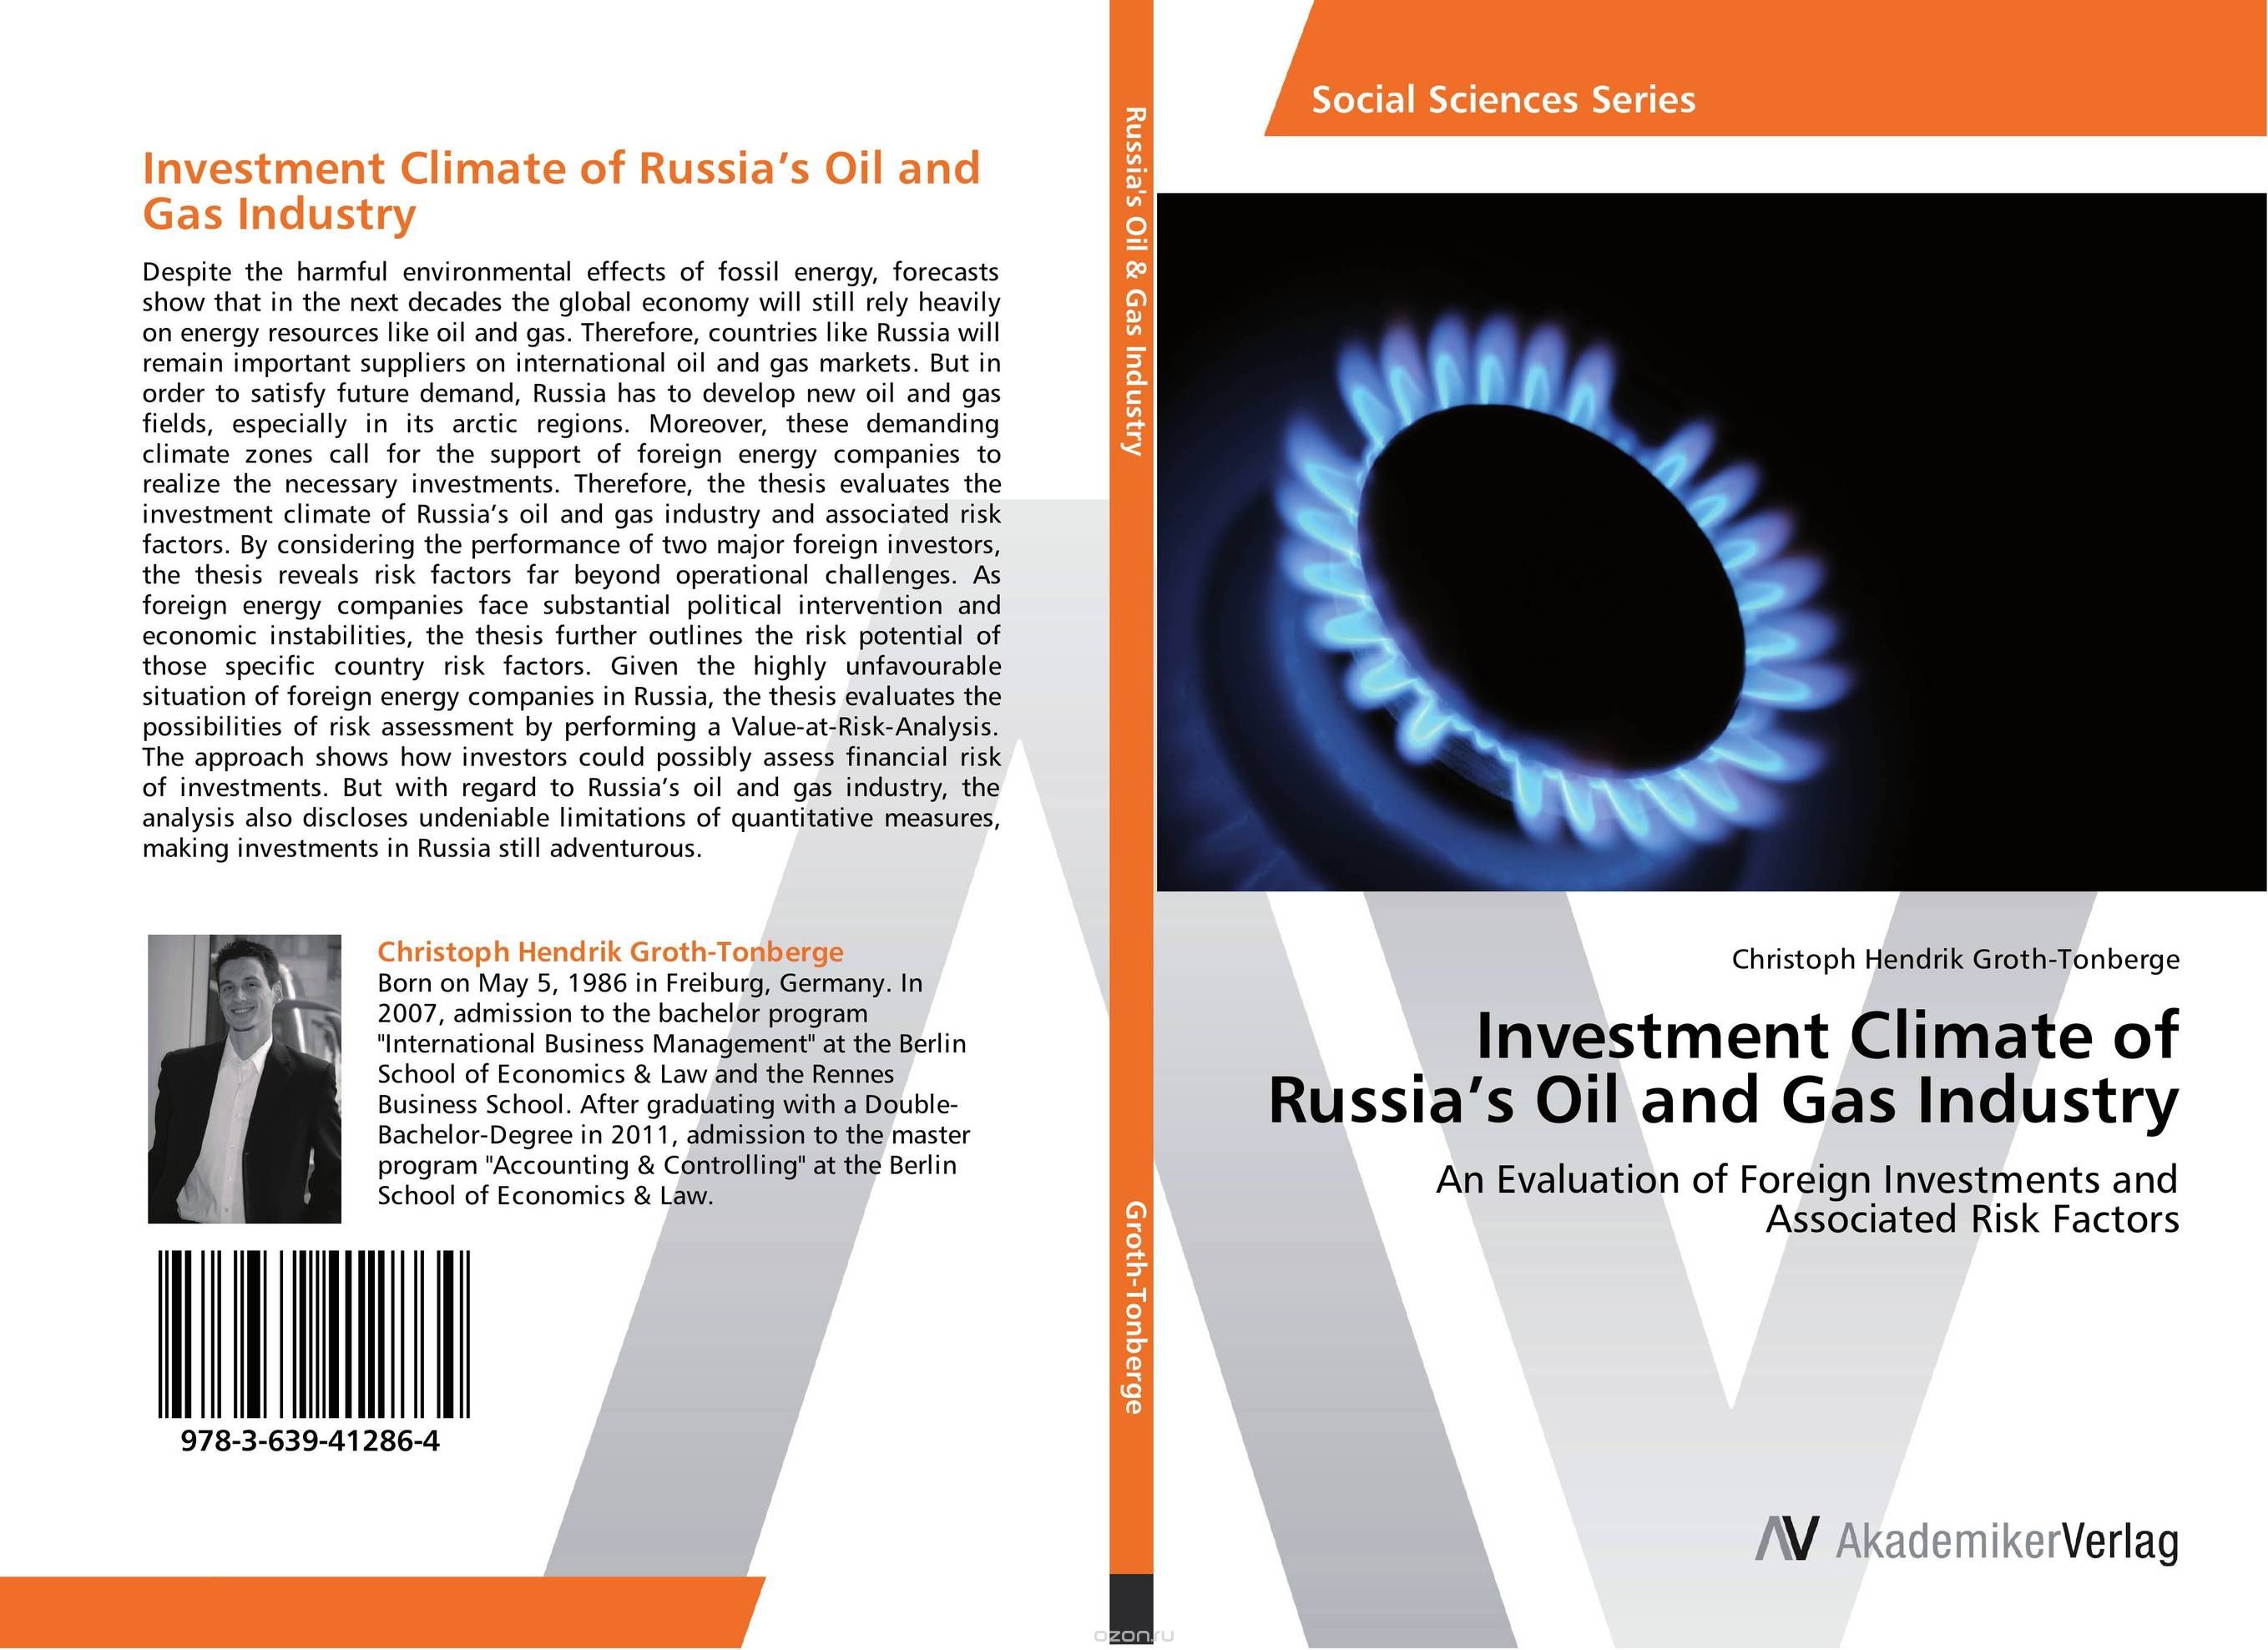 Скачать книгу "Investment Climate of Russia’s Oil and Gas Industry"